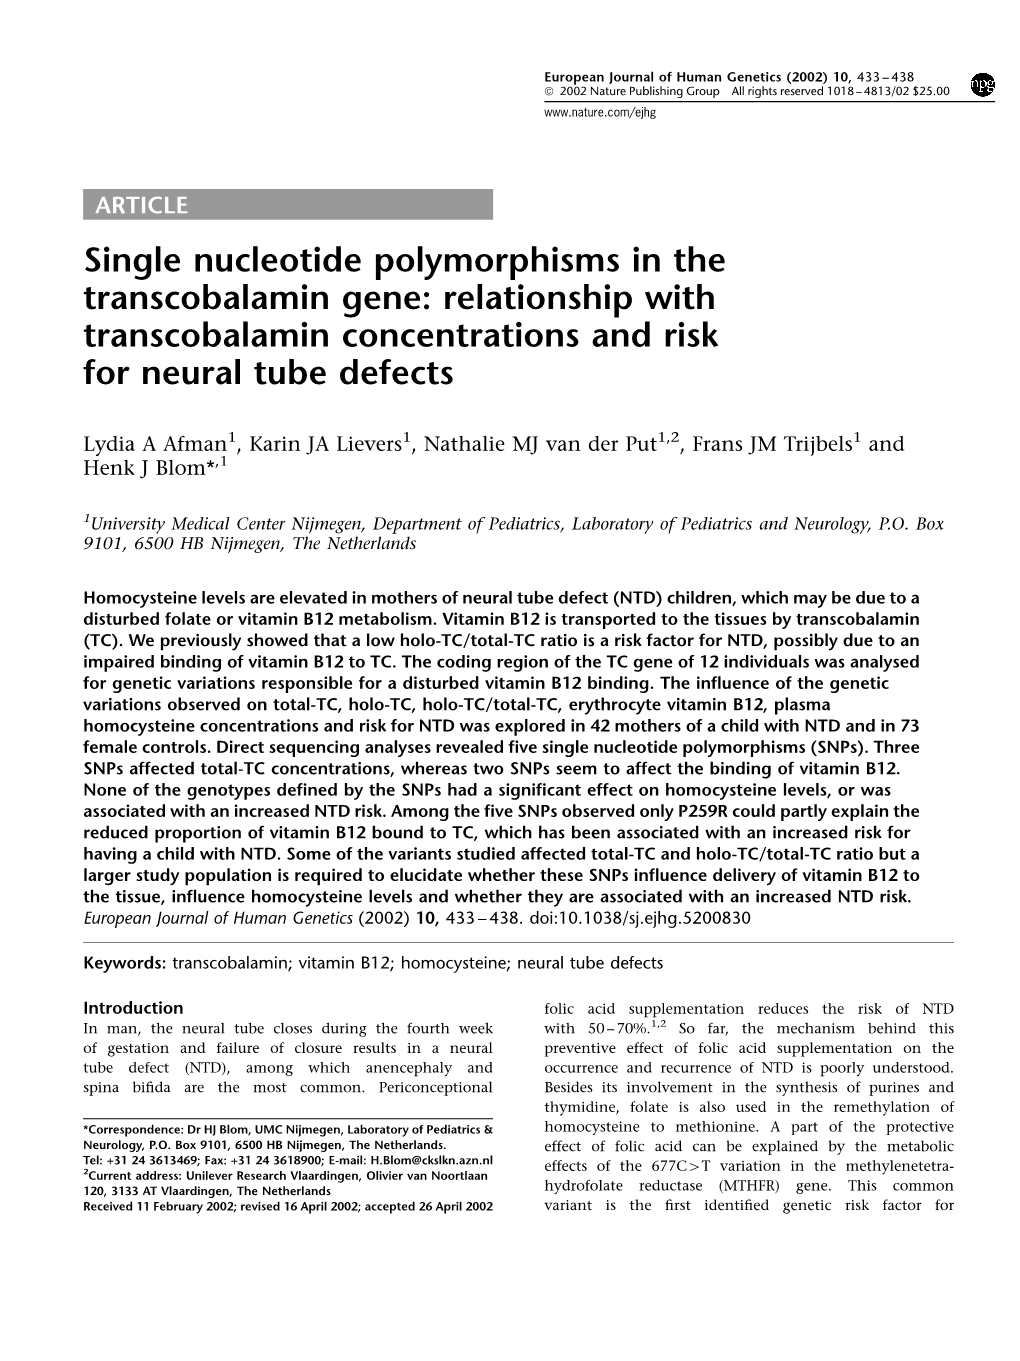 Relationship with Transcobalamin Concentrations and Risk for Neural Tube Defects